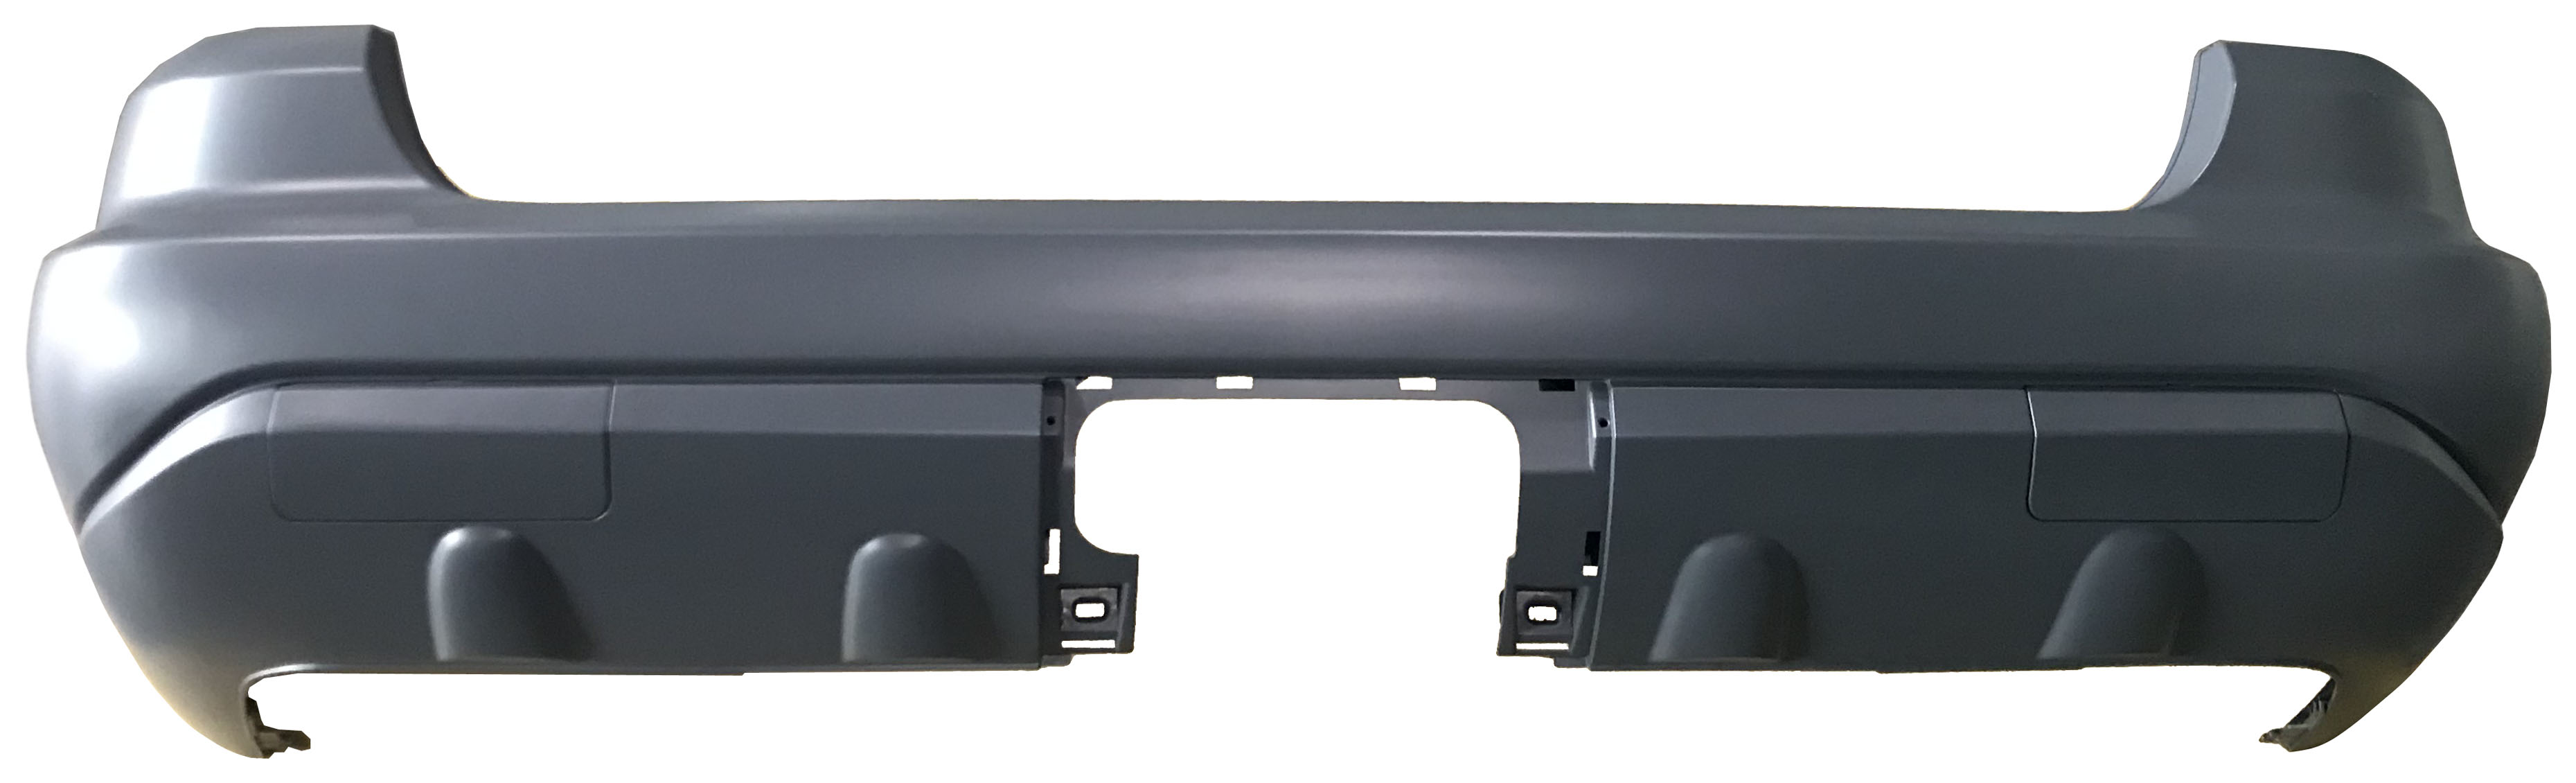 Aftermarket BUMPER COVERS for MERCEDES-BENZ - ML350, ML350,03-05,Rear bumper cover